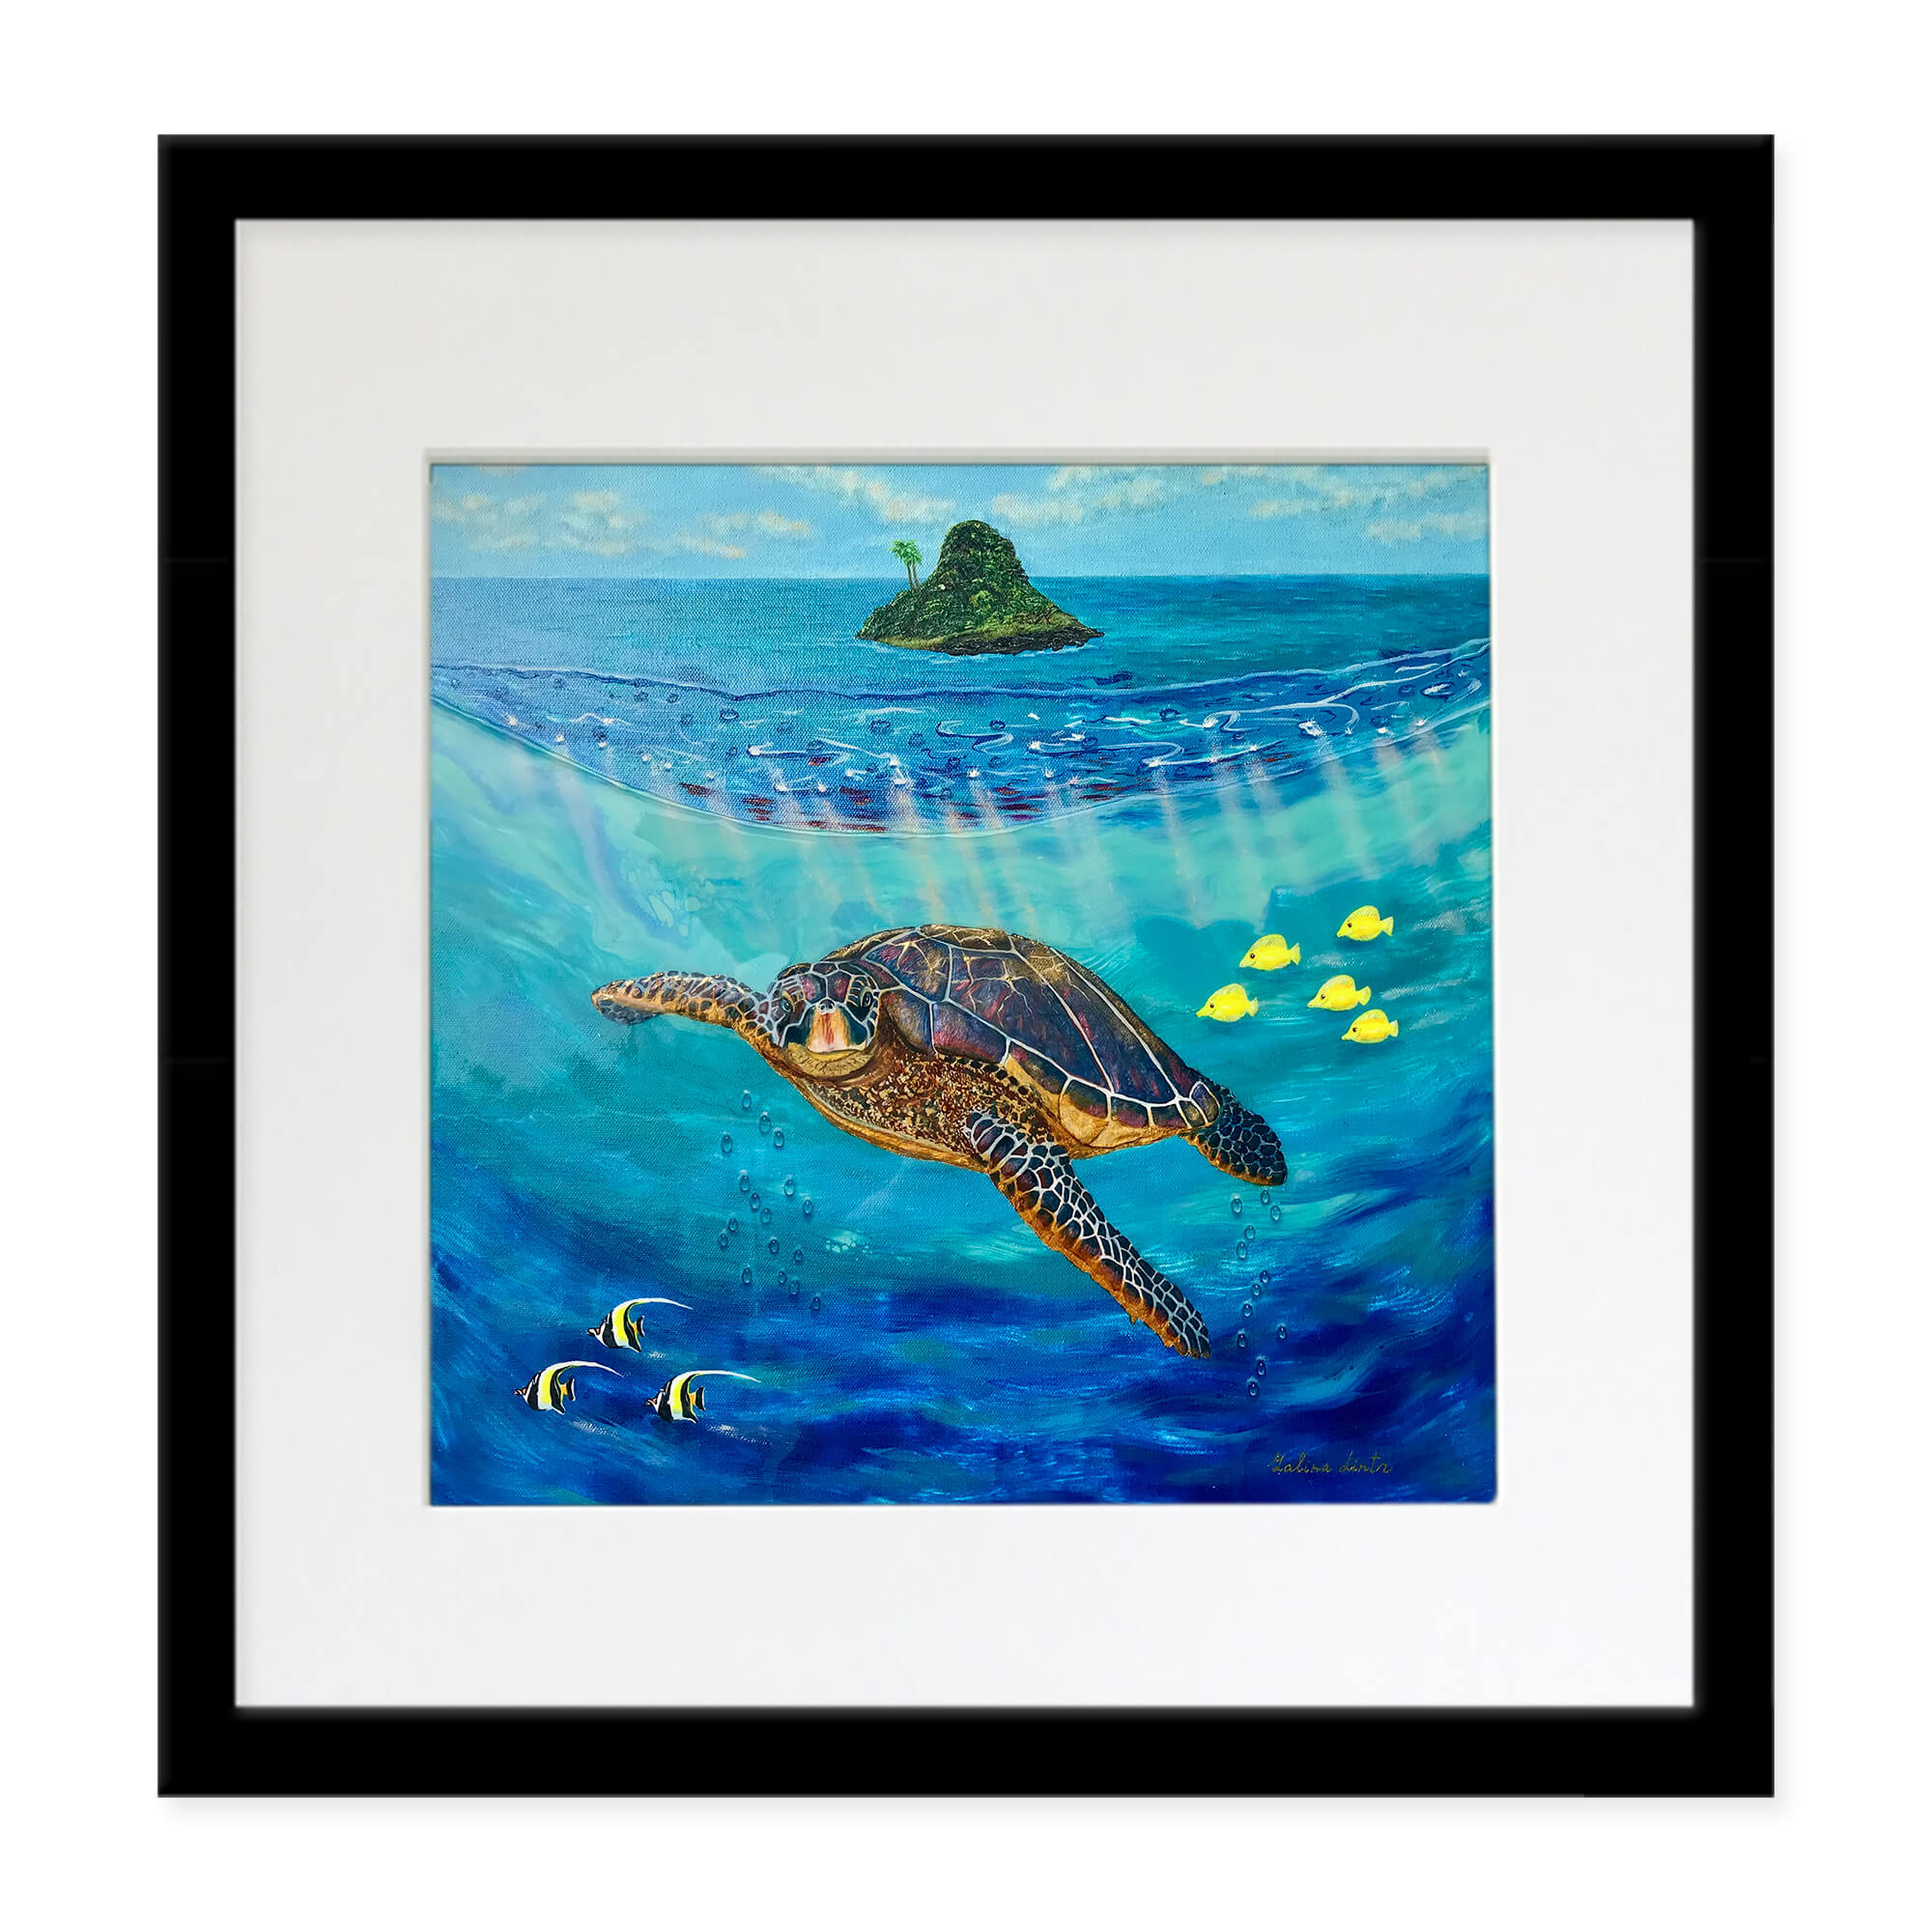 Matted art print with black frame showcasing a brown turtle by hawaii artist  Galina Lintz